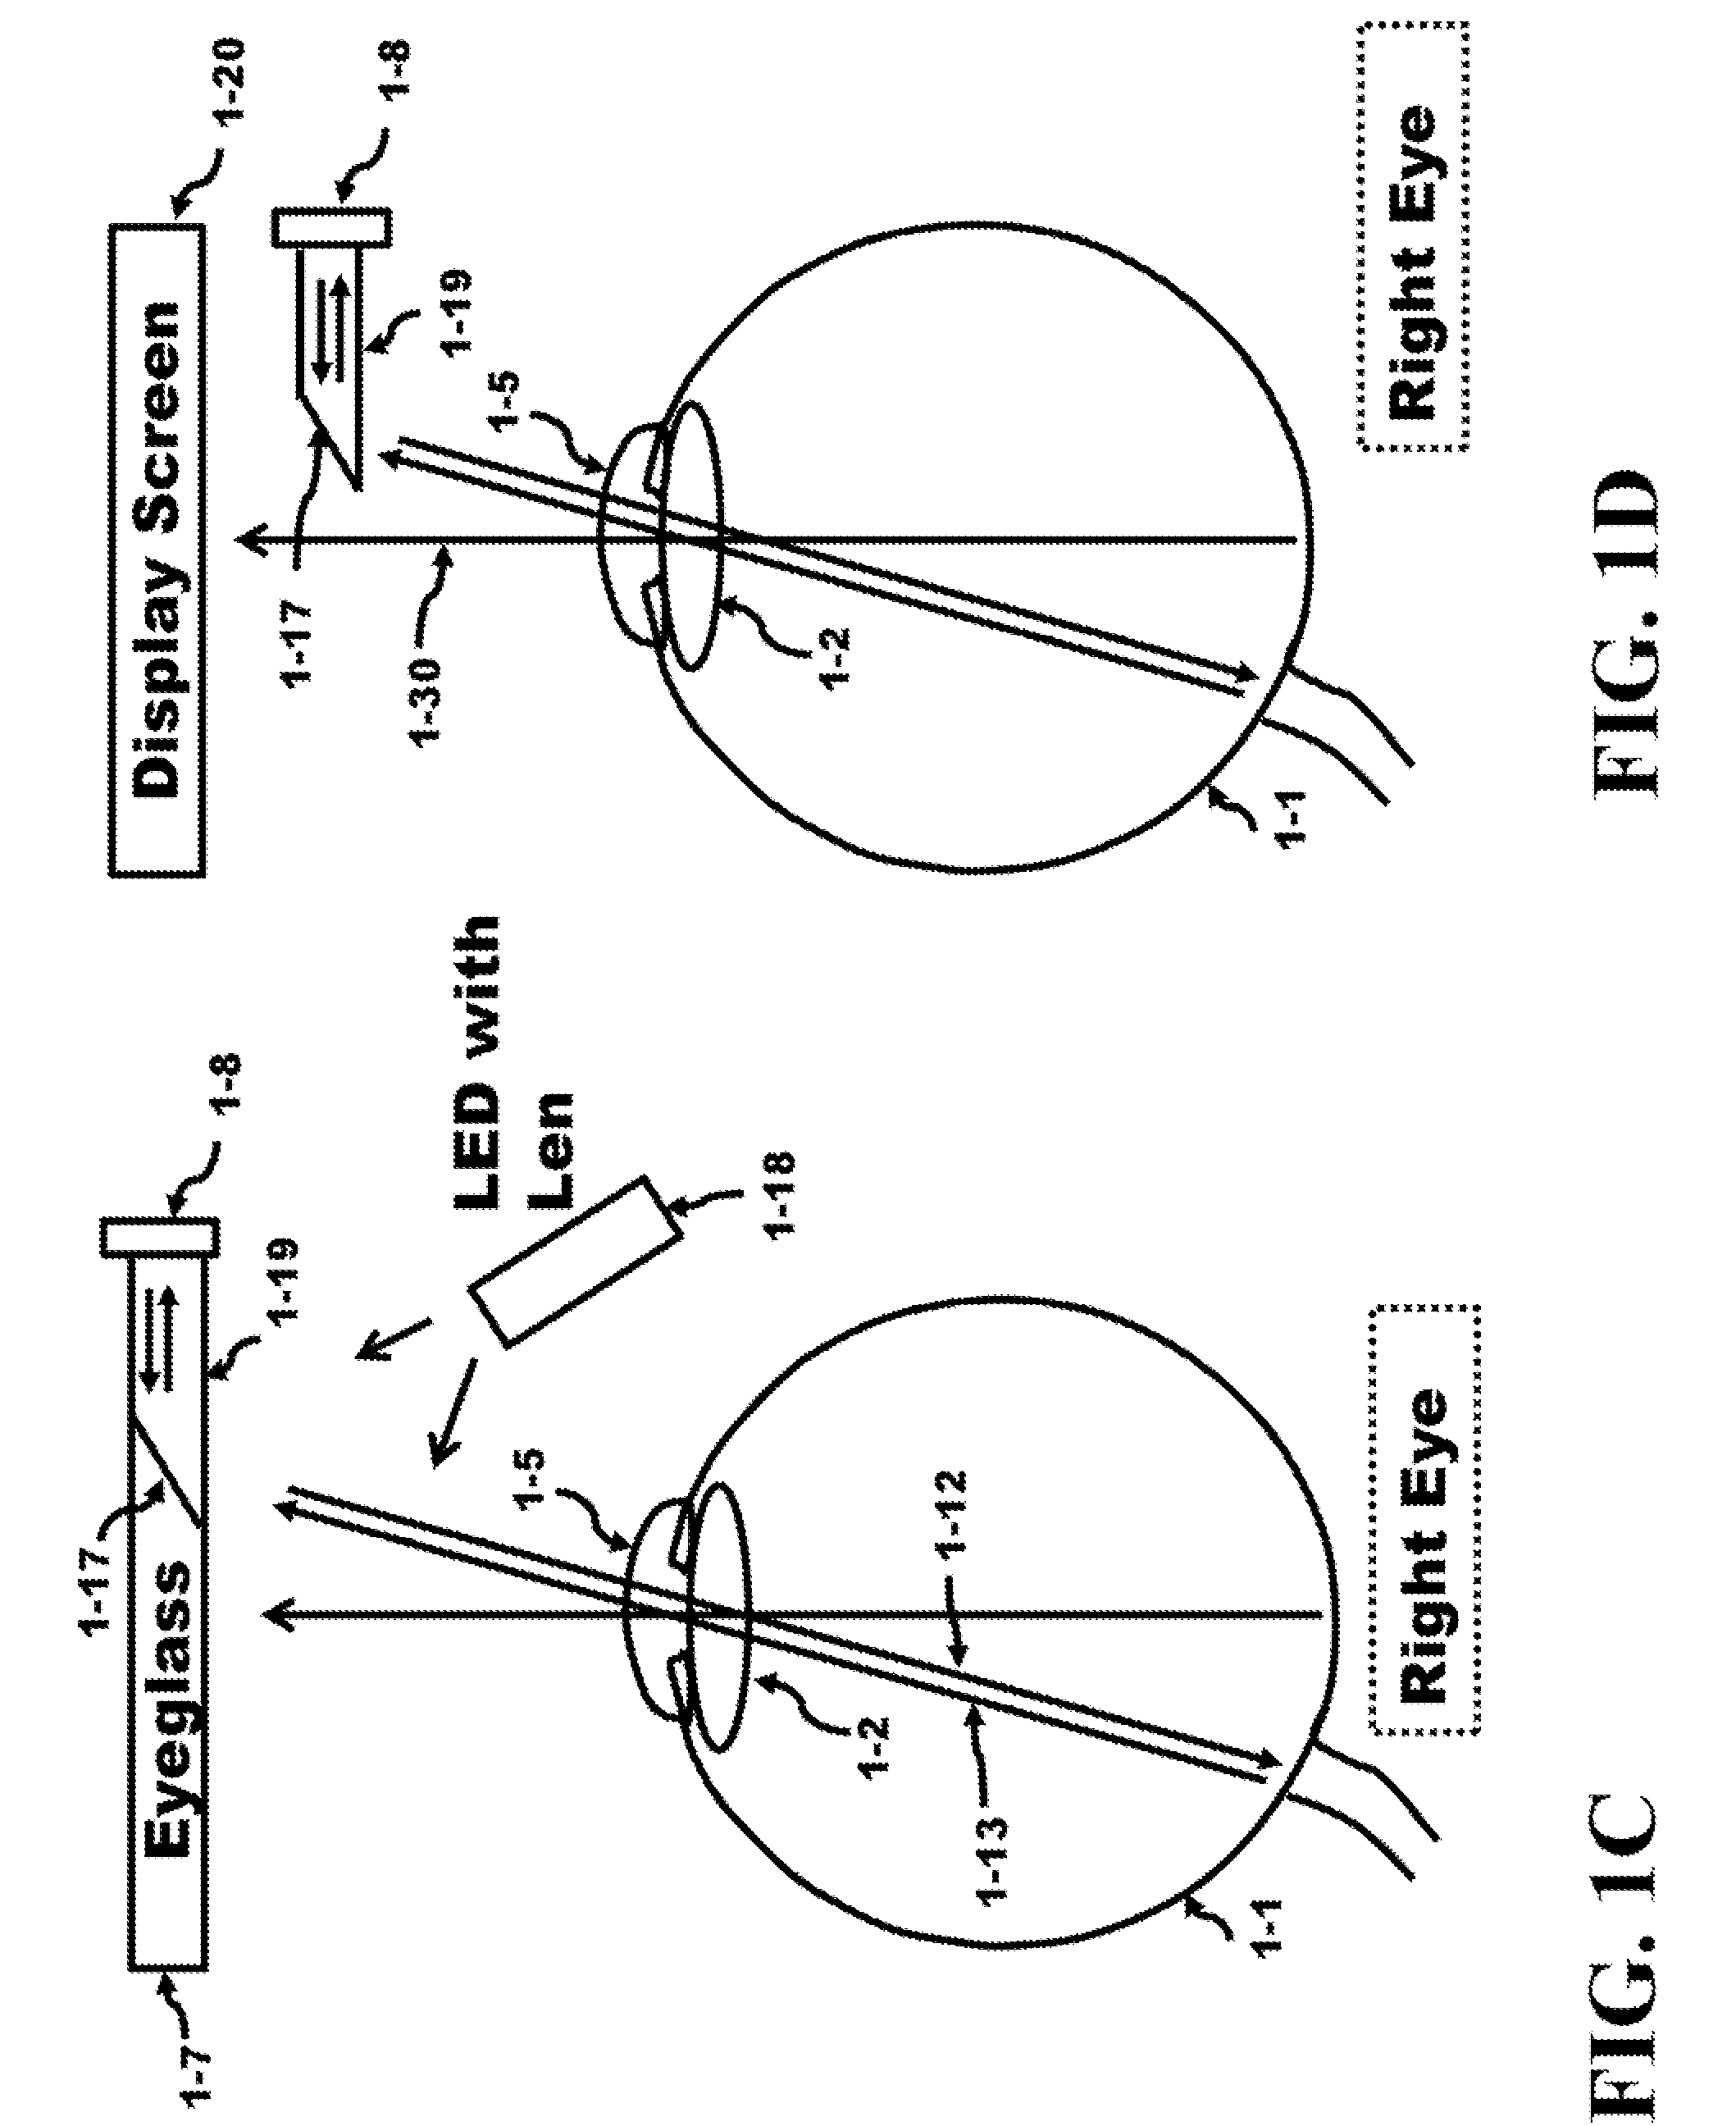 Method and Apparatus for a Self-Focusing Camera and Eyeglass System